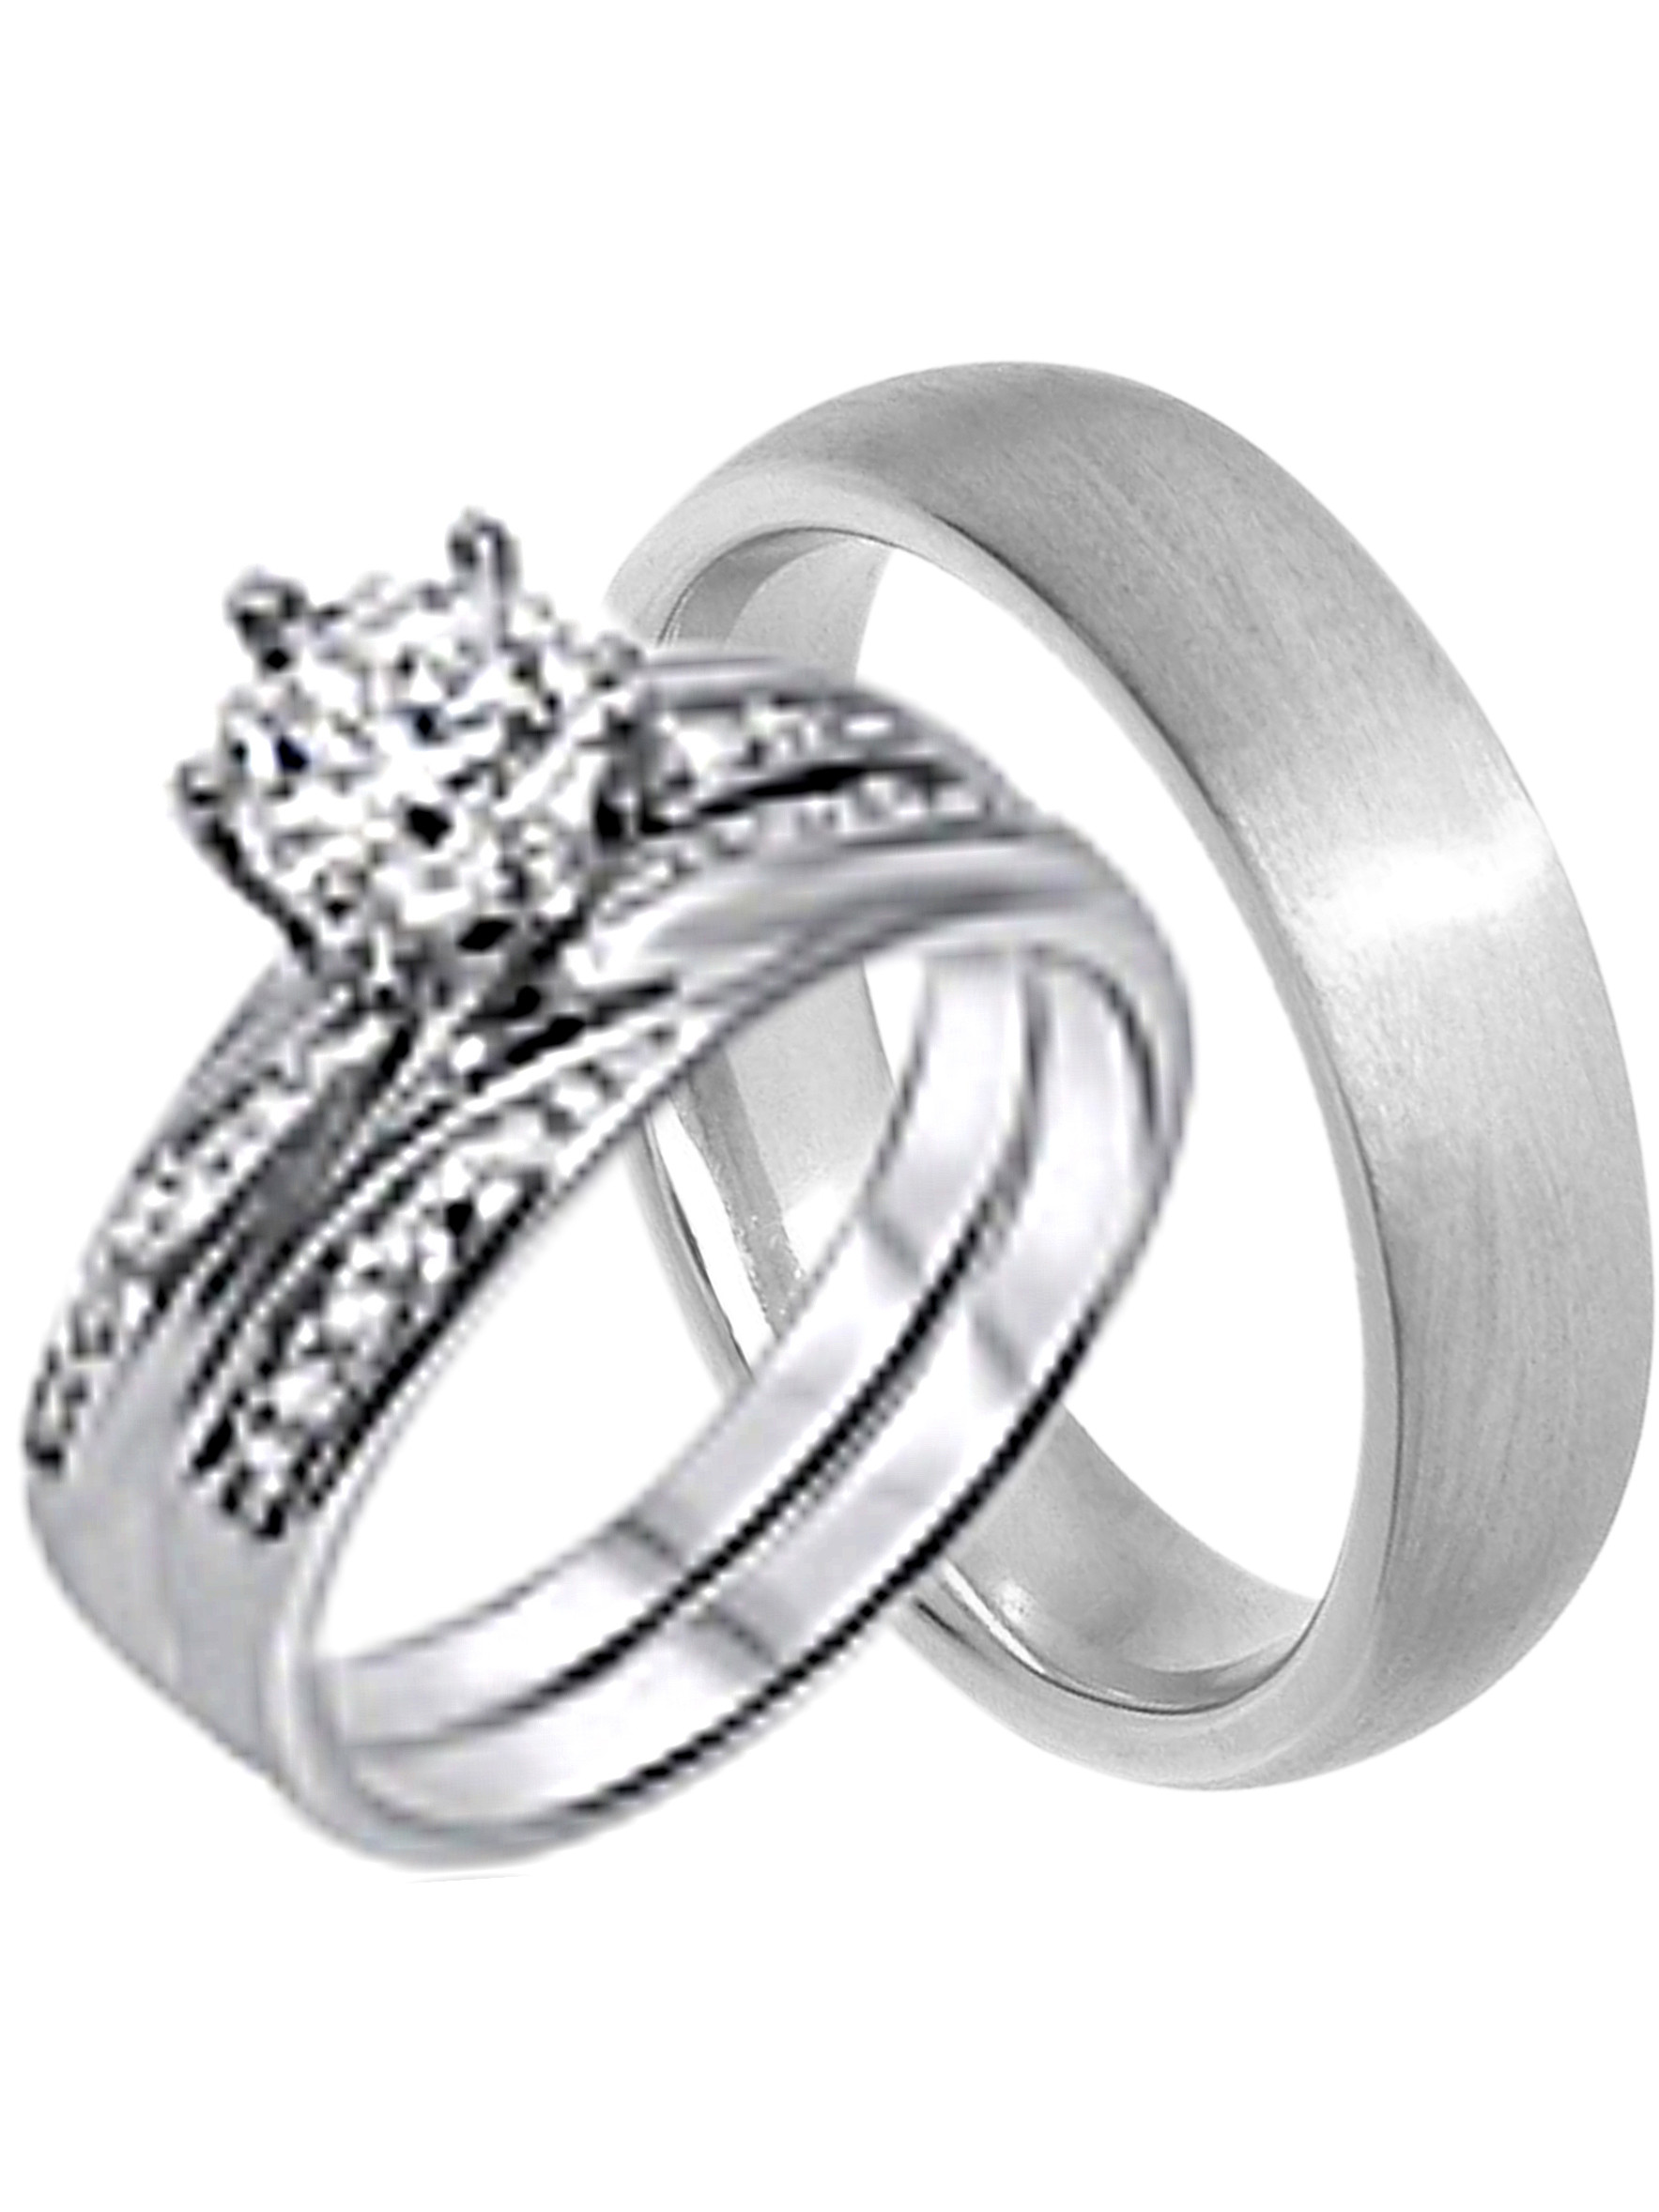 Cheap Wedding Rings Sets For Him And Her
 His and Hers Wedding Ring Set Cheap Wedding Bands for Him